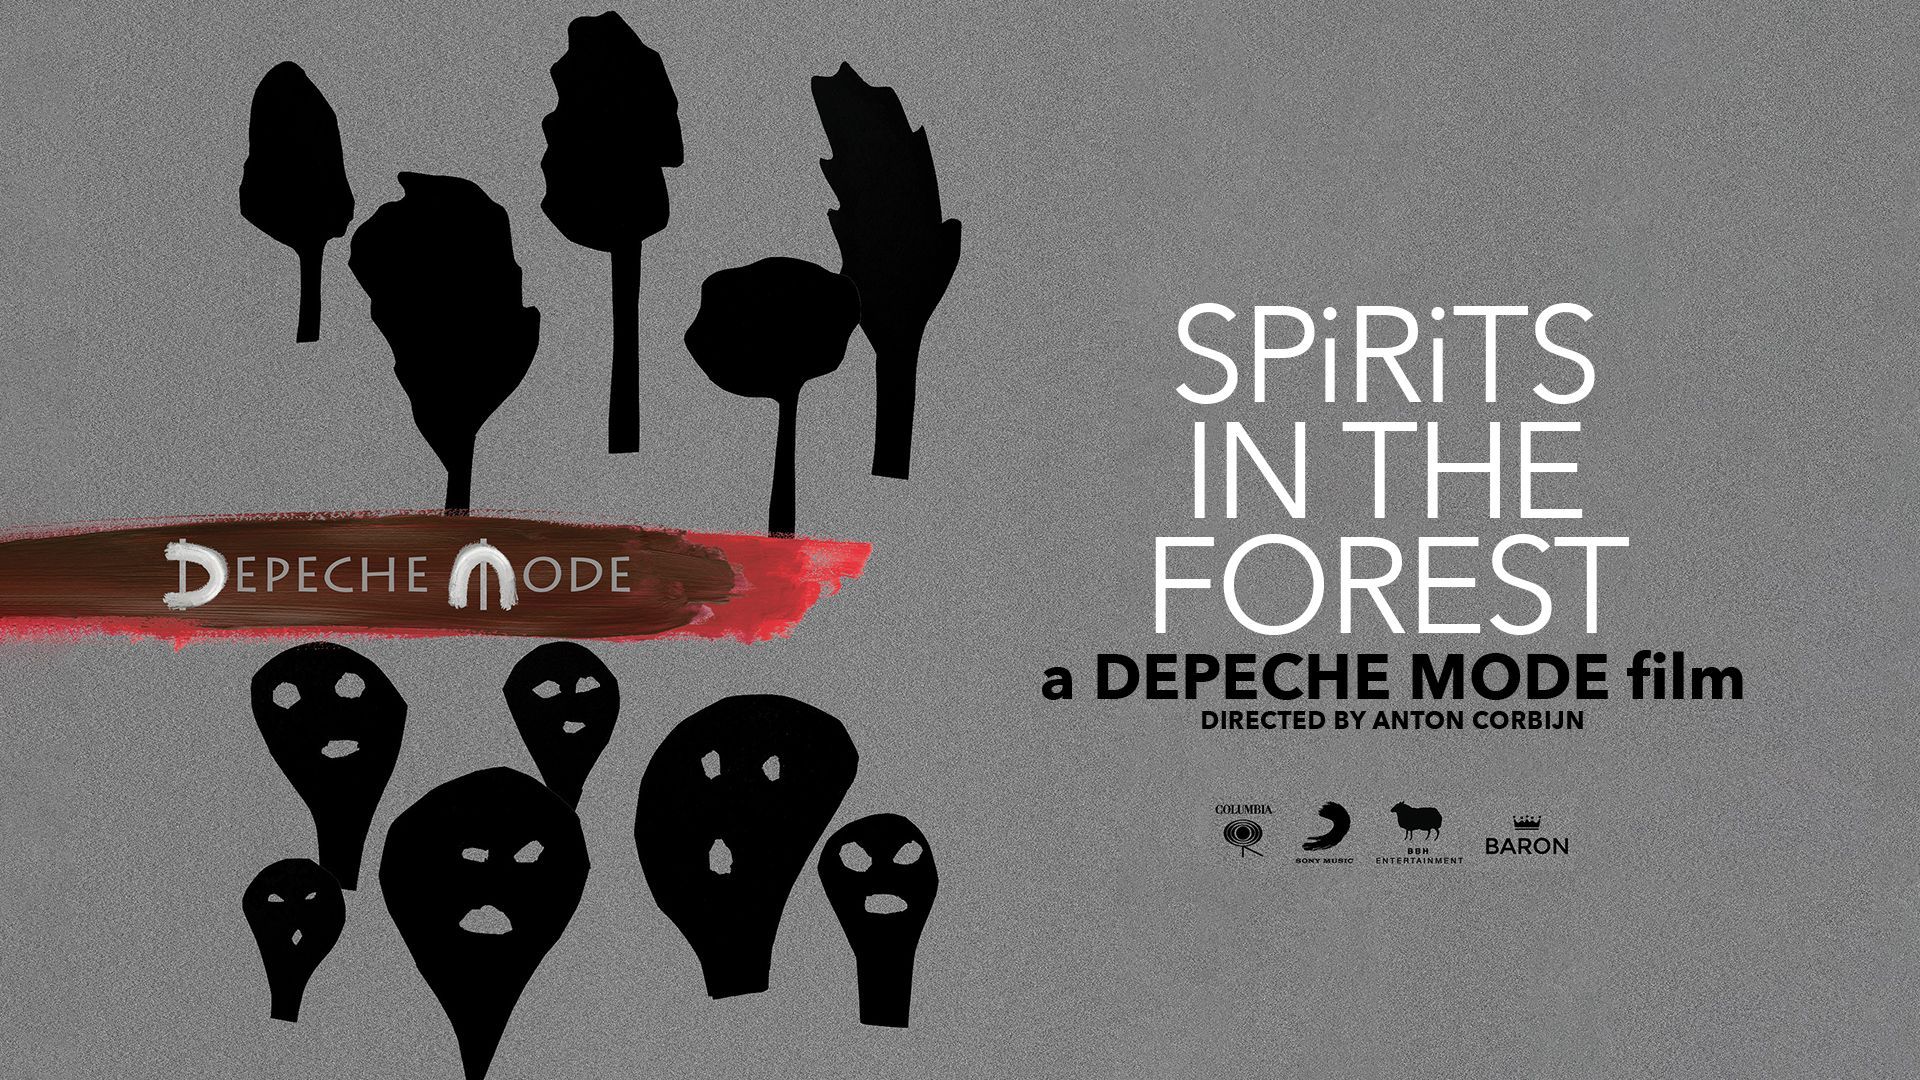 Depeche Mode - Spirits in the Forest